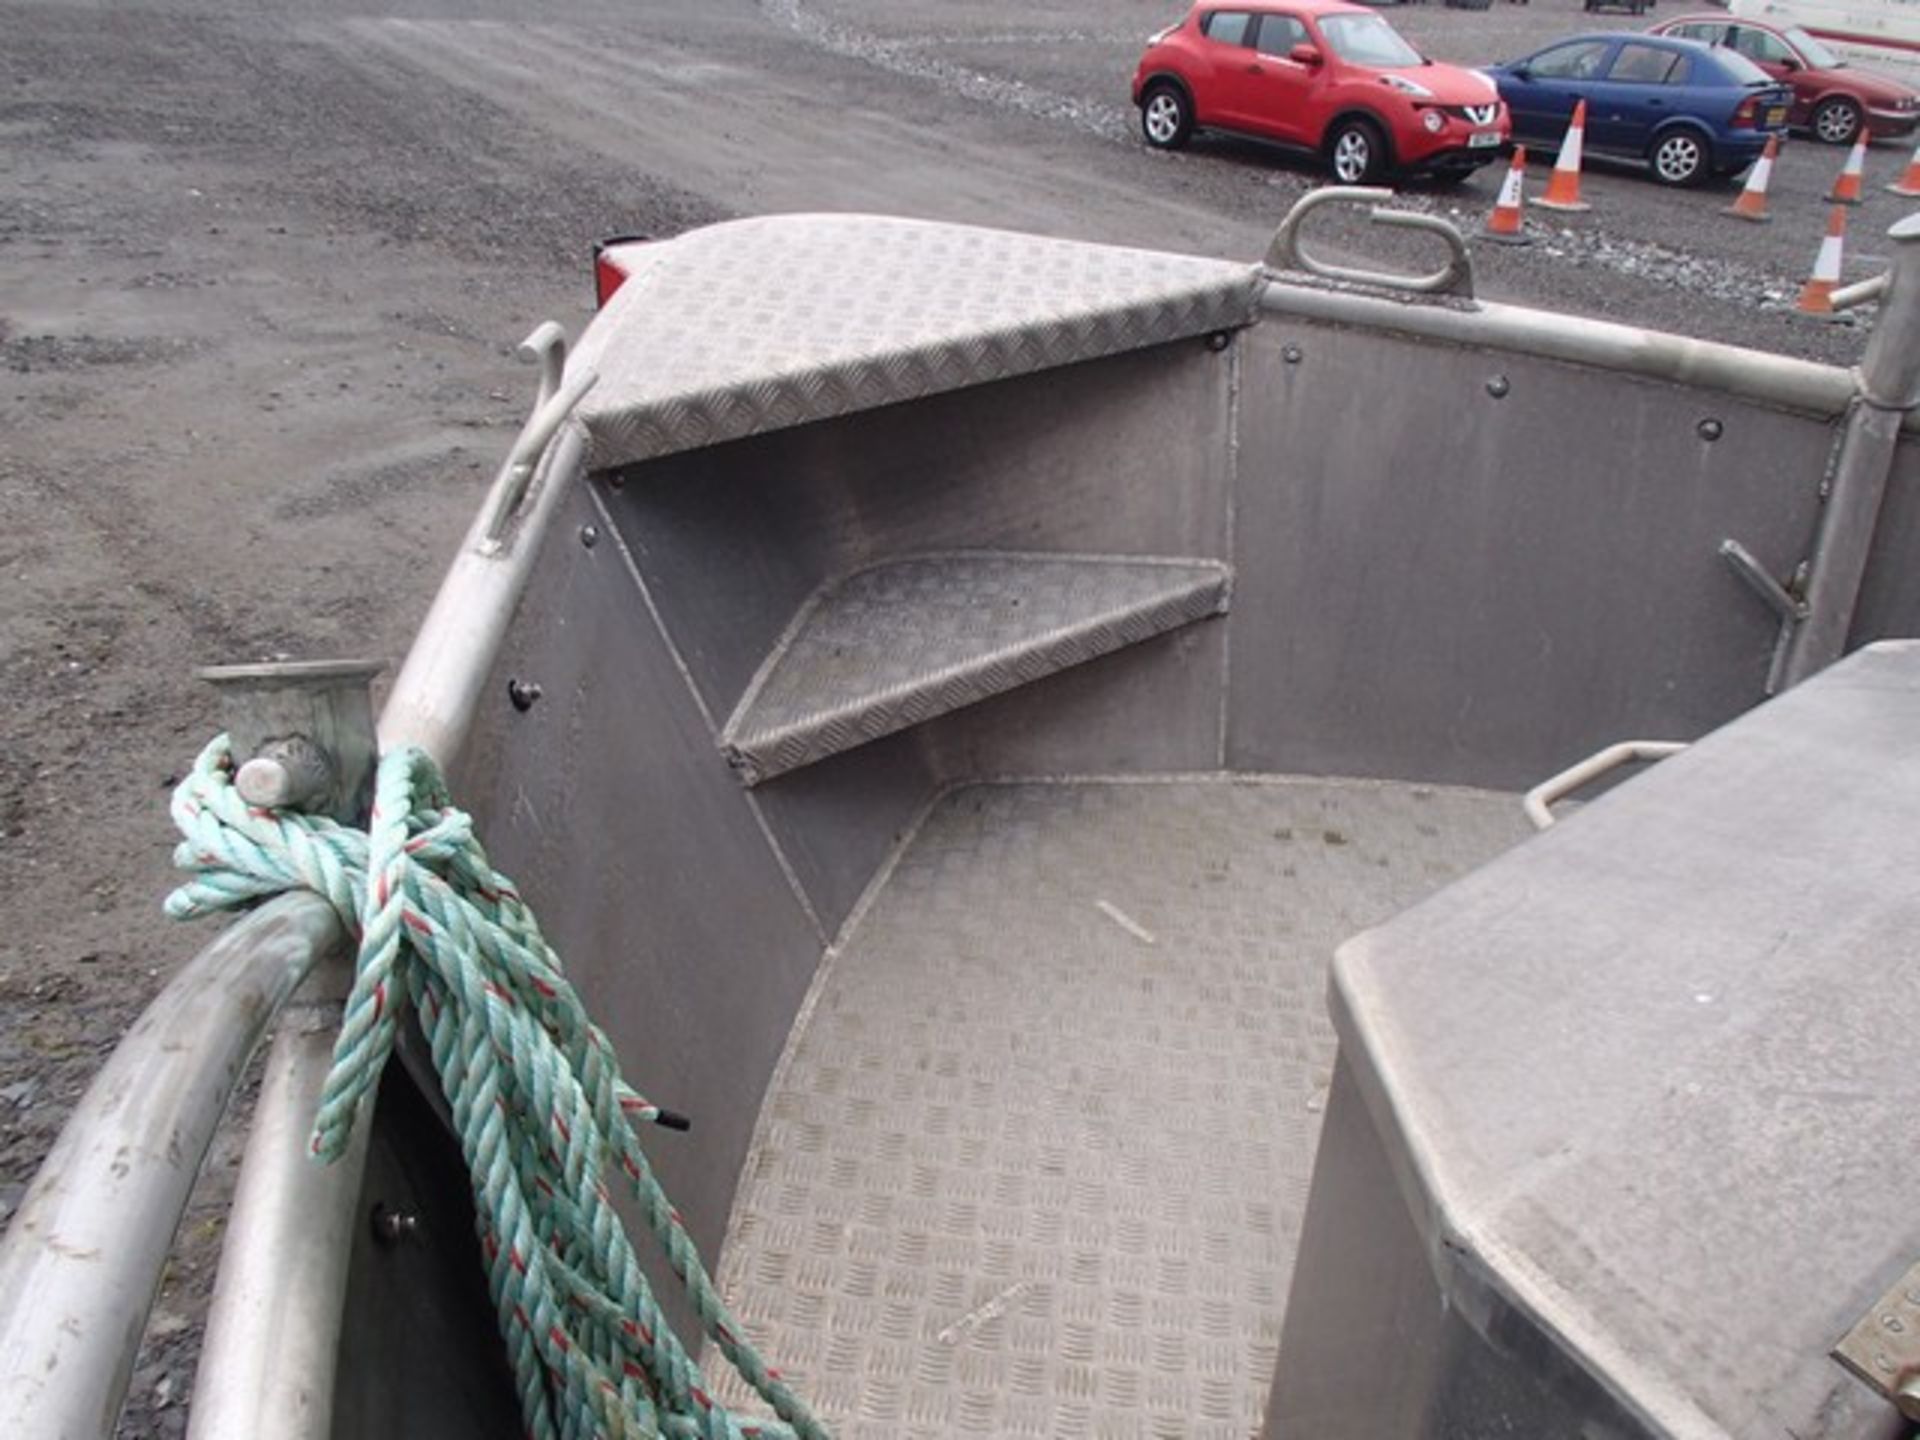 2013 30FT ALUMINIUM VOE BOAT BUILT BY MALAKOFF IN LERWICK. SPECIFICALLY DESIGNED FOR INSHORE SURVEY - Image 11 of 20